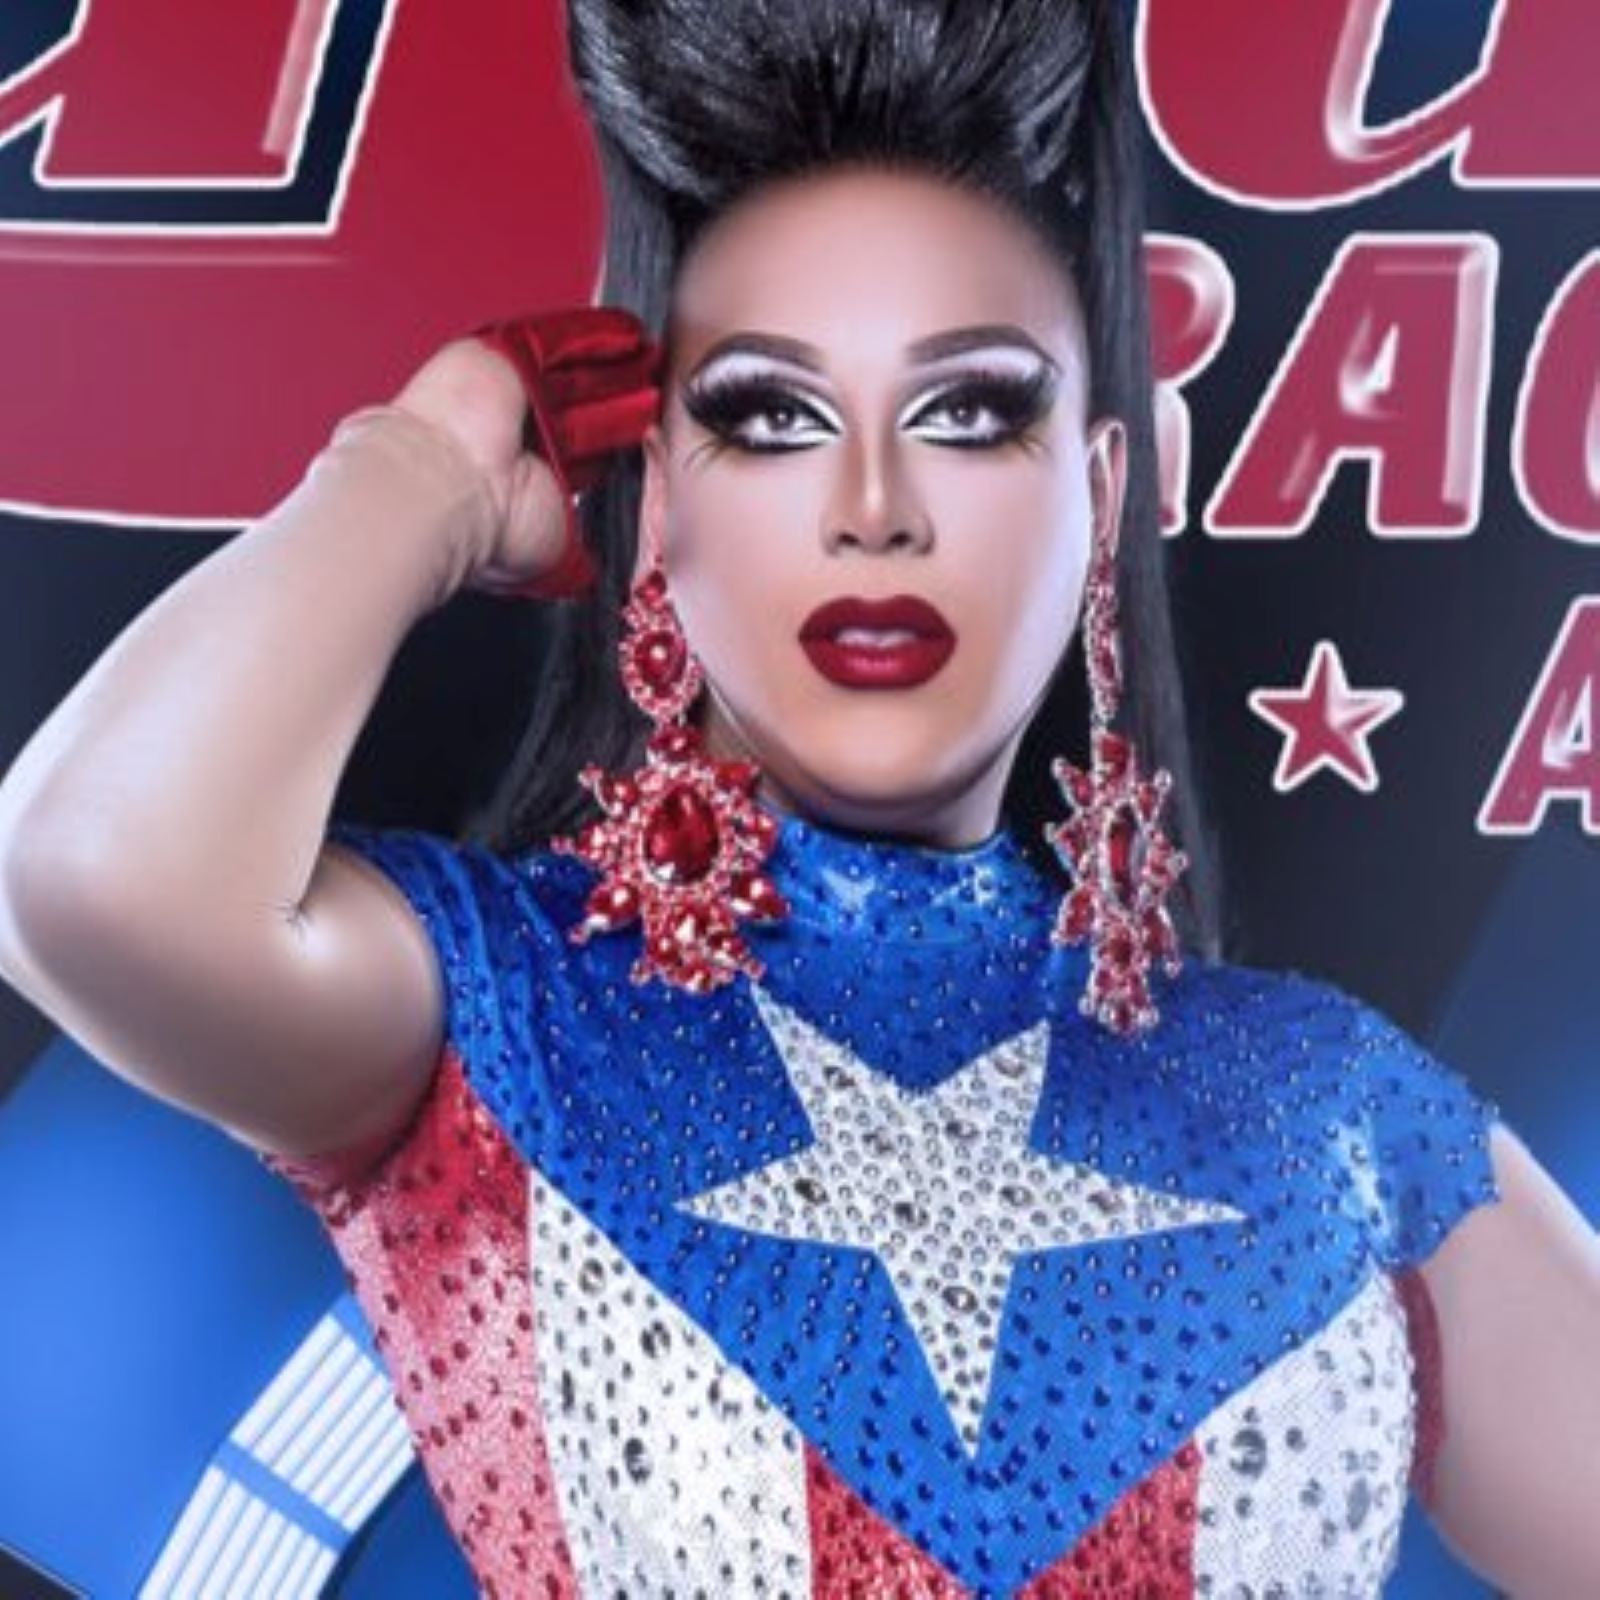 Once again, the predictions nailed which queens are coming back to the workroom for 'RuPaul's Drag Race All Stars' 5. Now who's taking the crown?